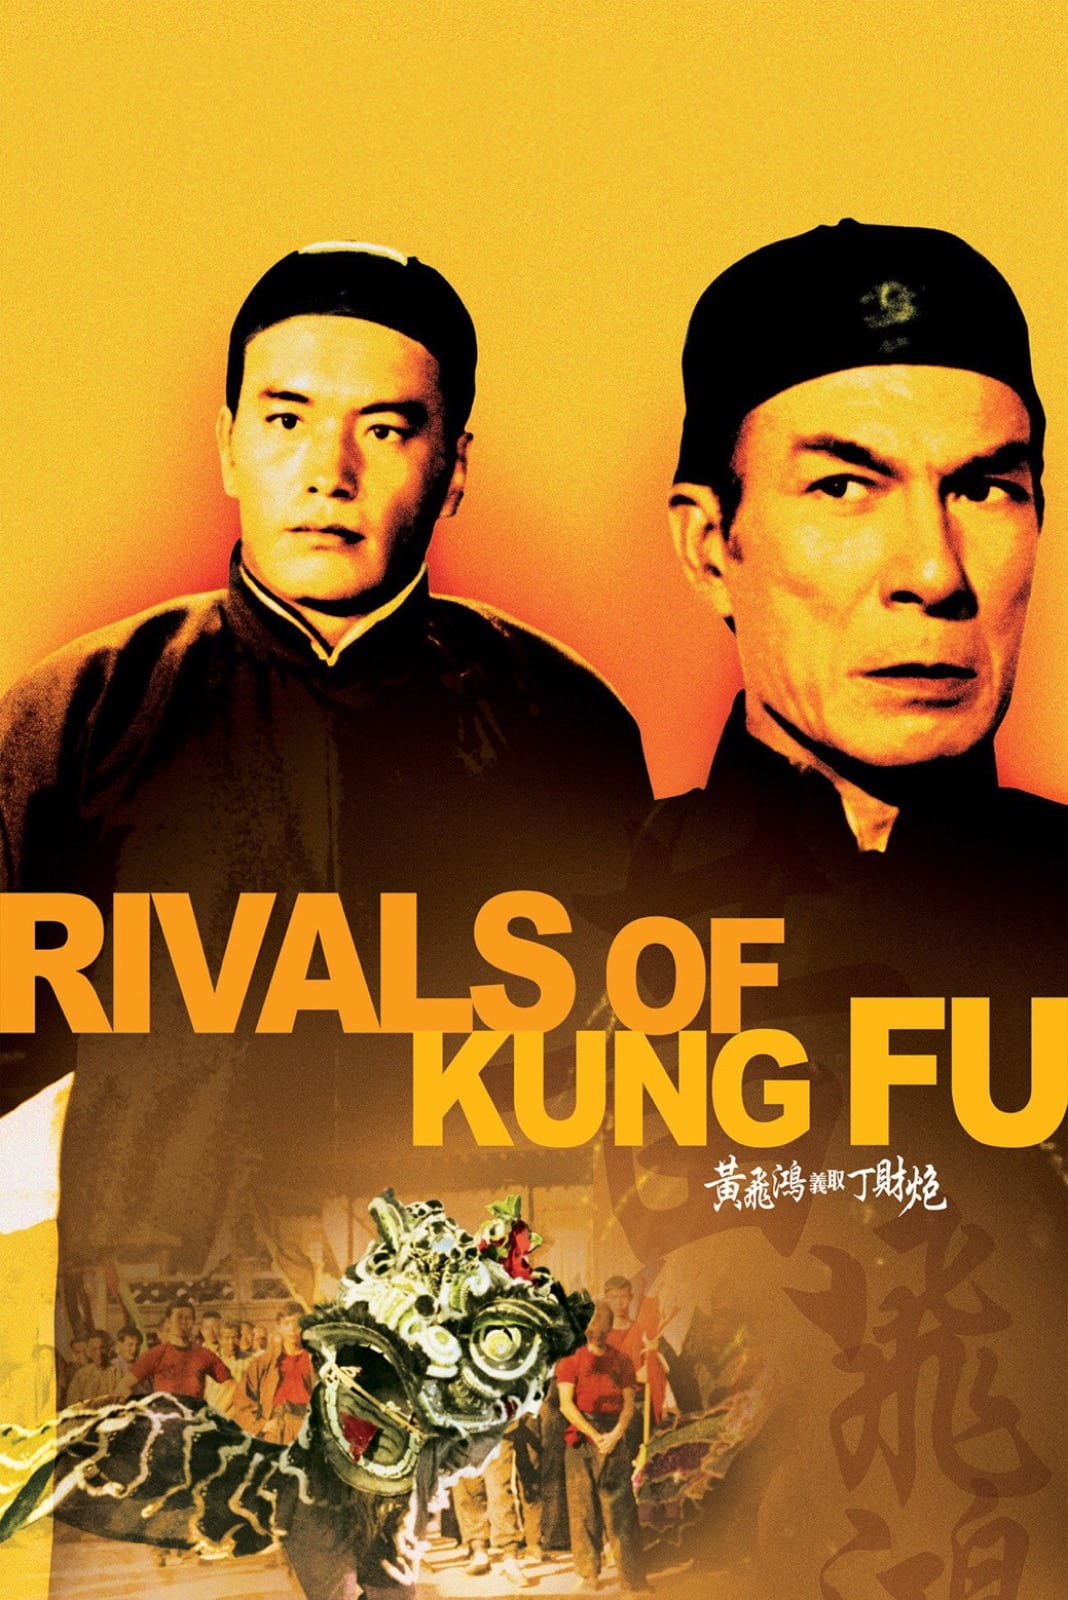 Rivals of Kung Fu (1974)